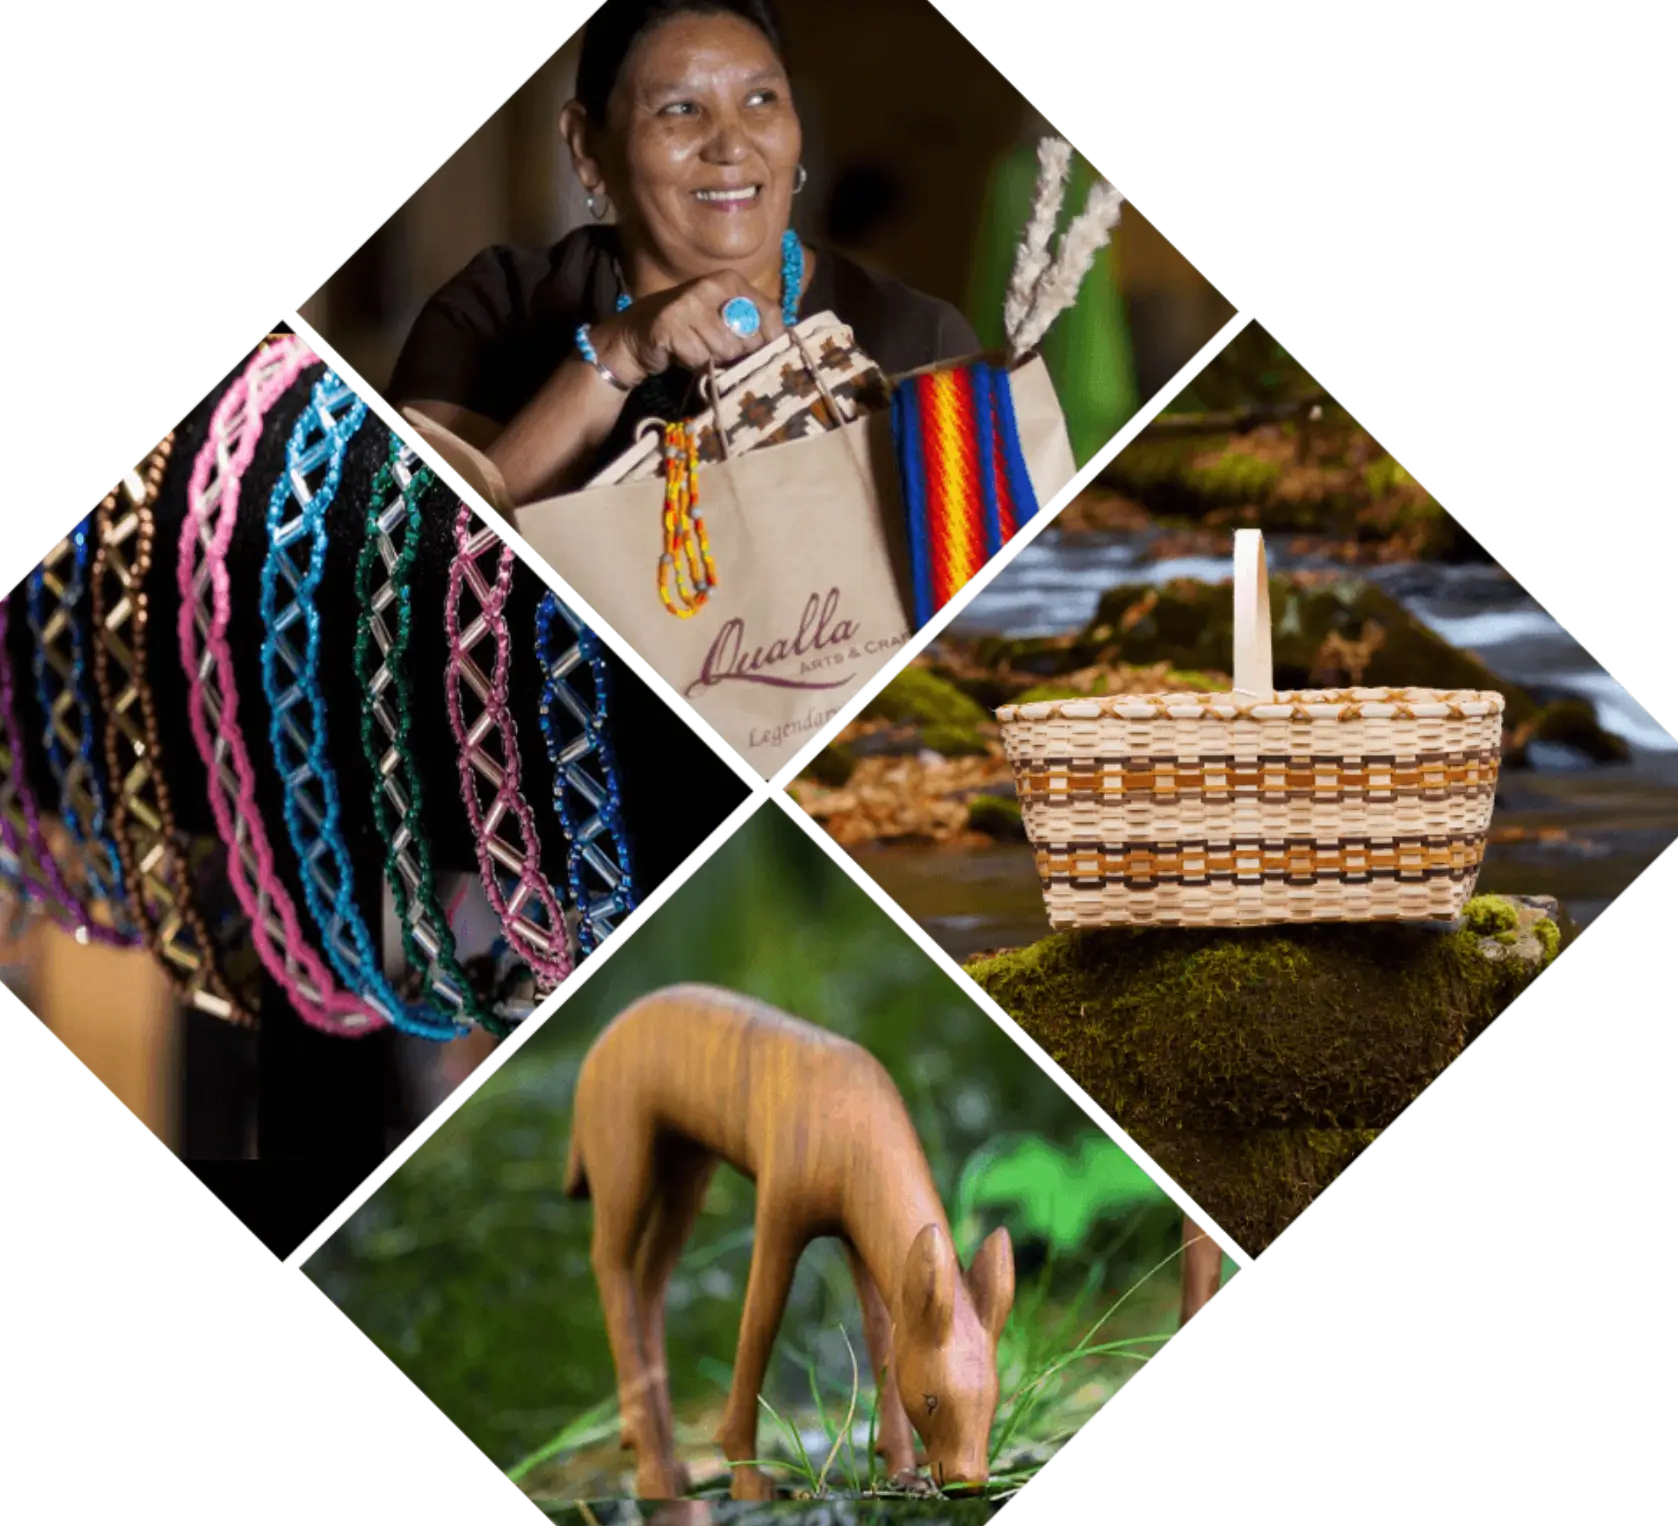 A collage of four images: a smiling woman holding colorful handcrafted bags, a detailed handmade basket on a rock by water, and a wooden carving of a deer in a natural setting.